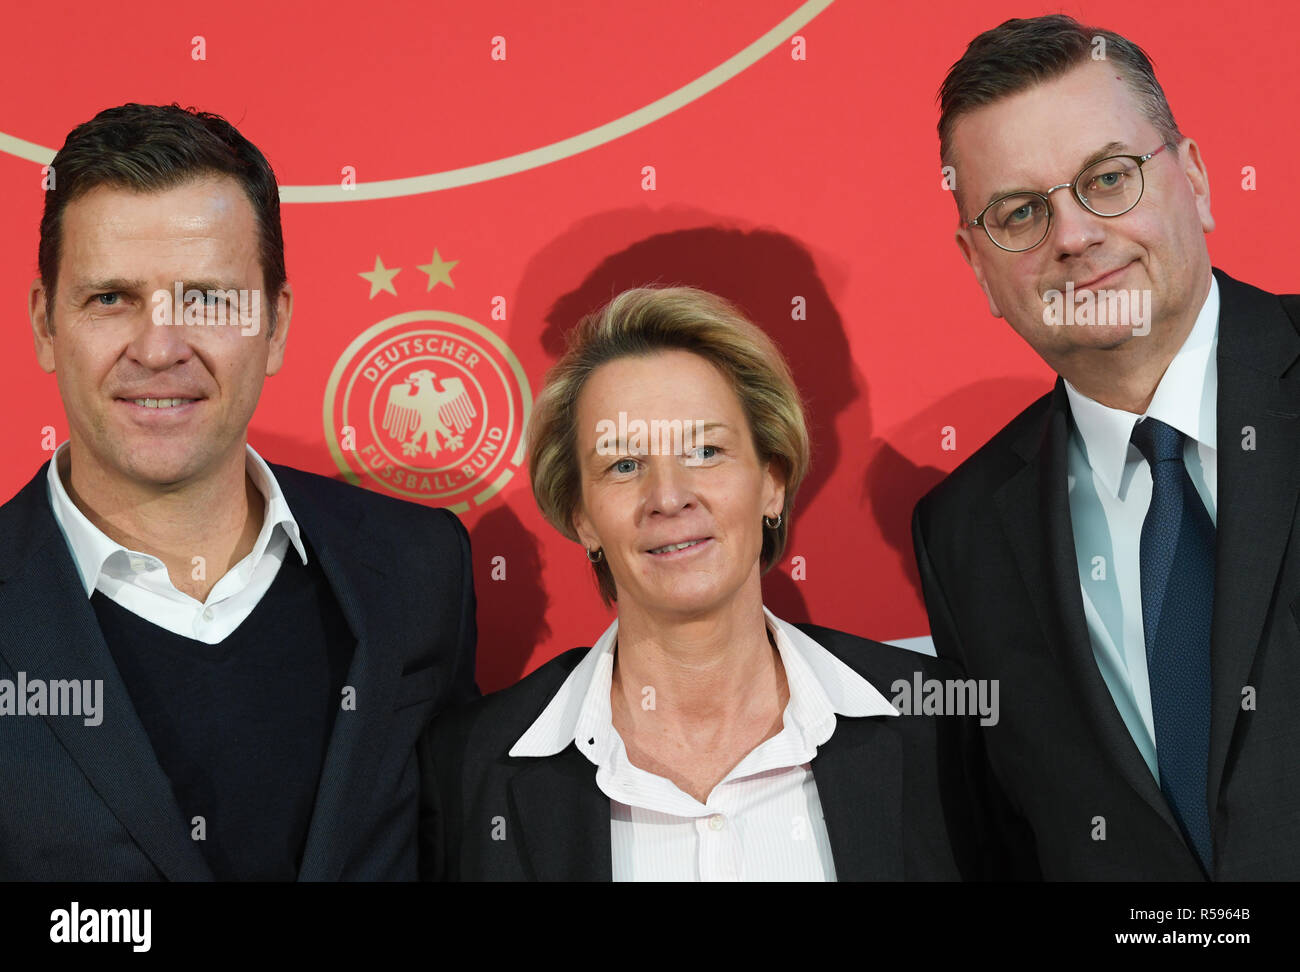 30 November 2018, Hessen, Frankfurt/Main: Oliver Bierhoff (l), DFB Director National Teams, and Reinhard Grindel, President of the German Football Association (DFB), will take part in the press conference to present Martina Voss-Tecklenburg, the new national coach of the women's national team, at the DFB headquarters. Voss-Tecklenburg was previously coach of the Swiss women's national team and is the successor to Horst Hrubesch. Photo: Arne Dedert/dpa Stock Photo